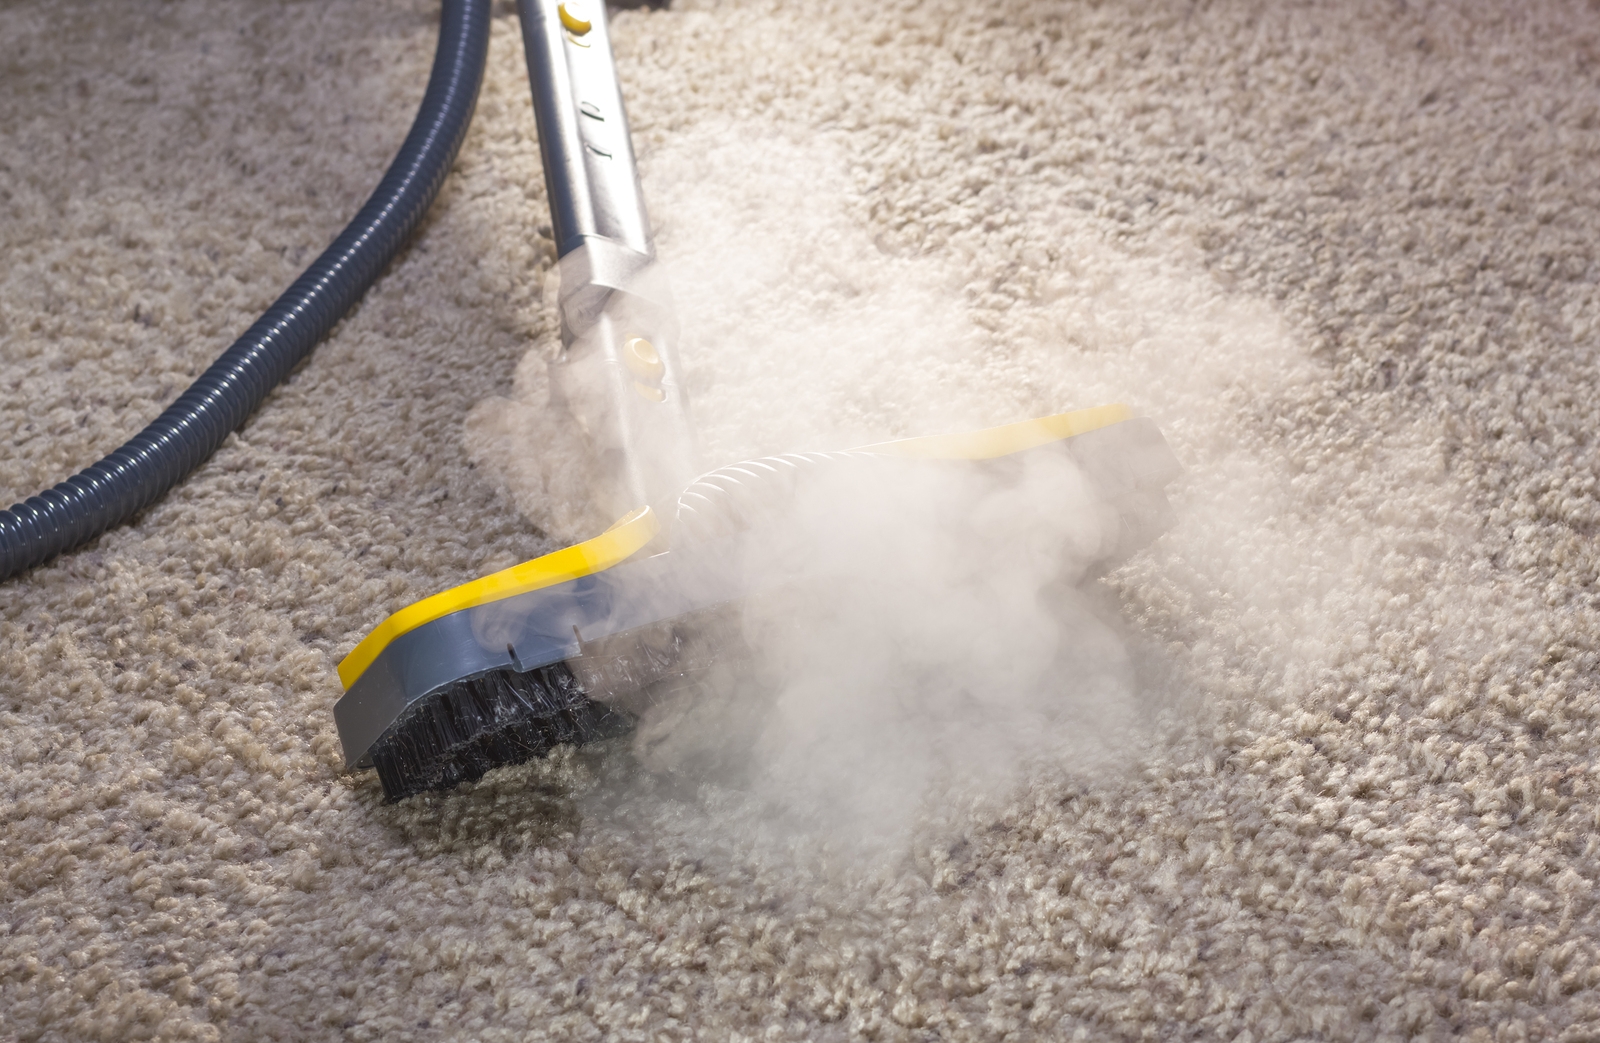 Professional Carpet Cleaning – Benefits for Your Home and Health